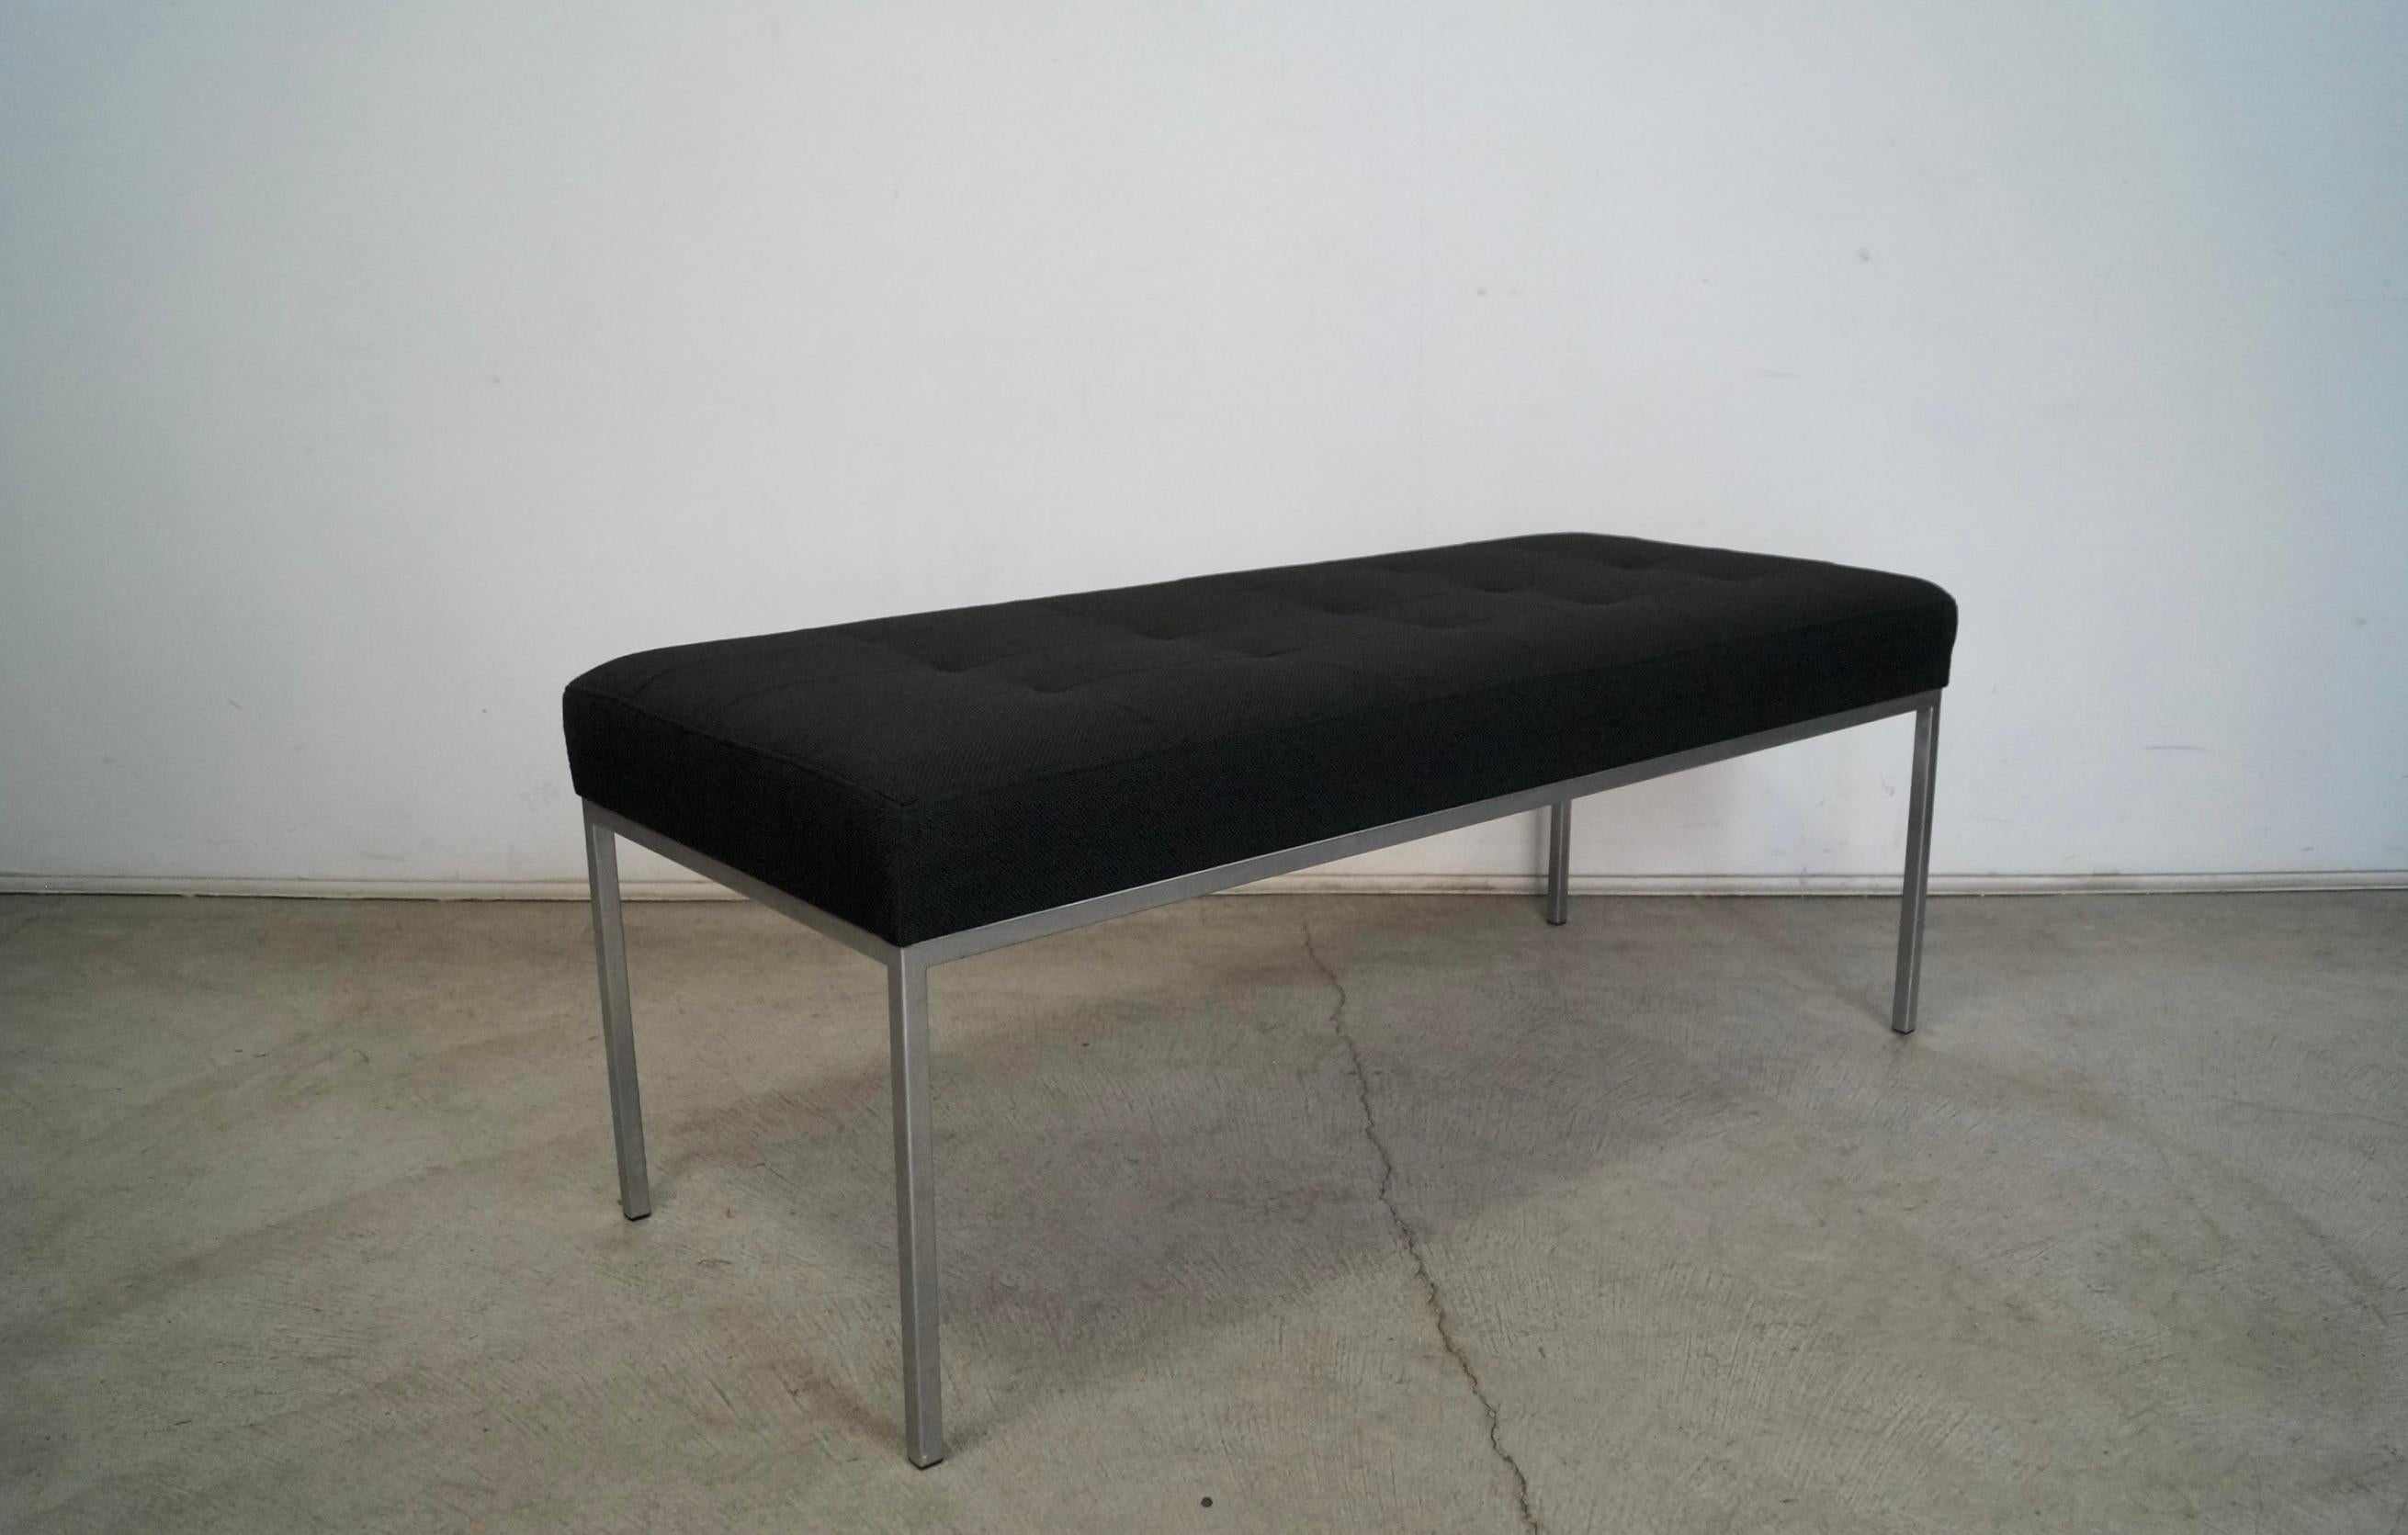 1960's Mid-Century Modern Florence Knoll Style Aluminum & Tweed Bench In Excellent Condition For Sale In Burbank, CA